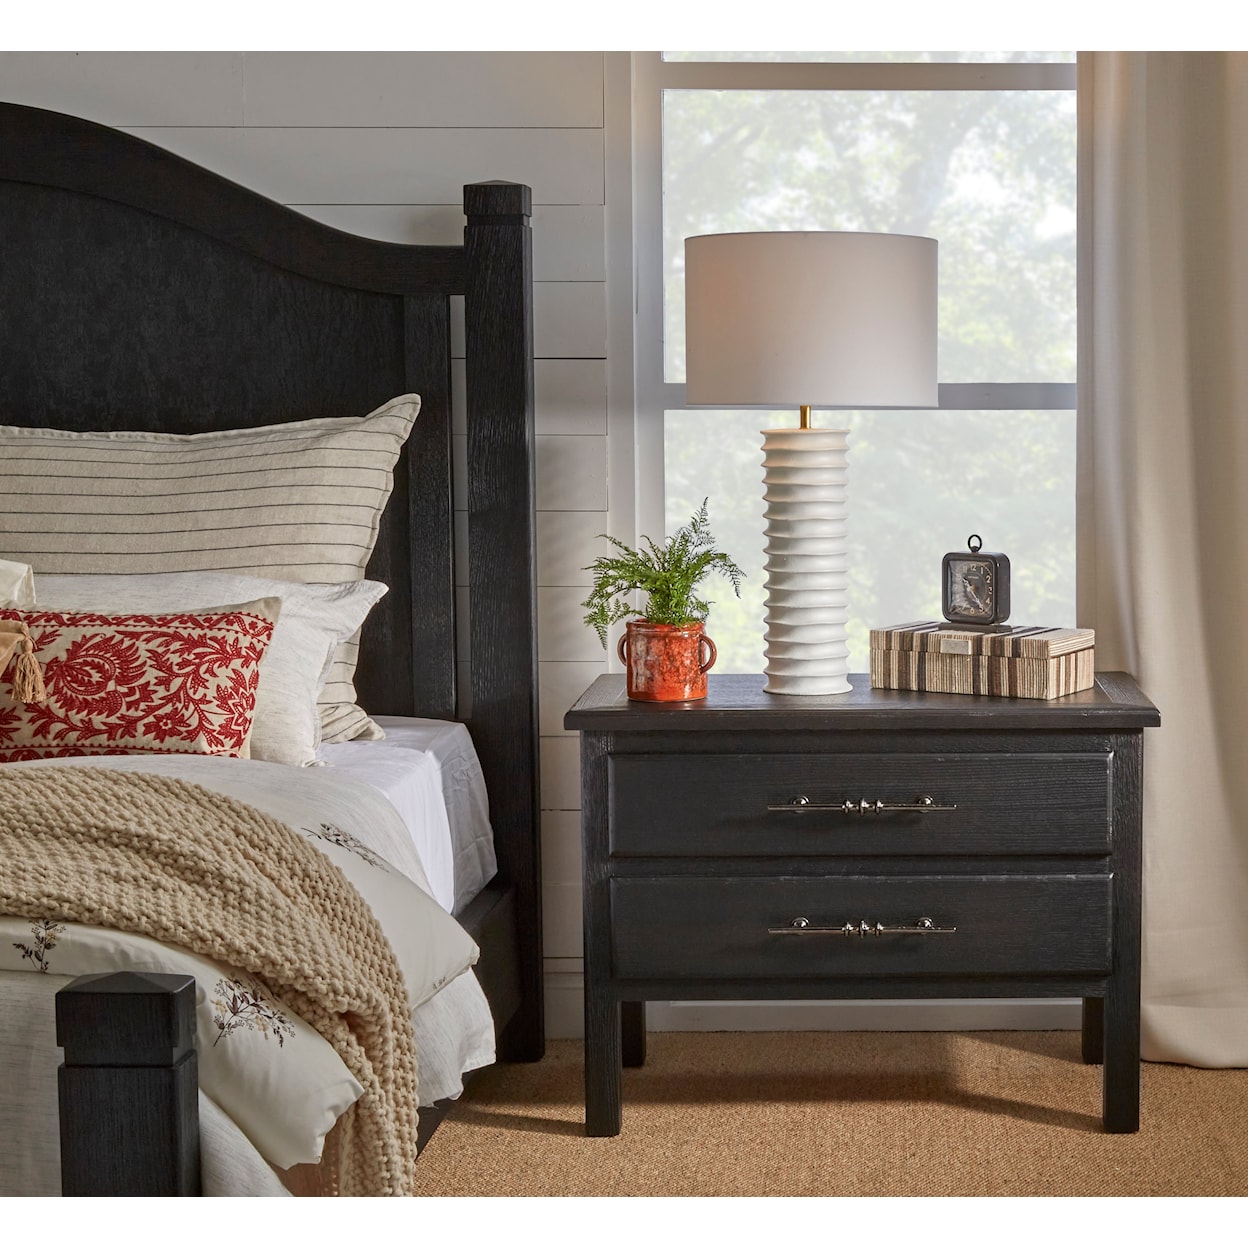 The Preserve Turner Accent Nightstand